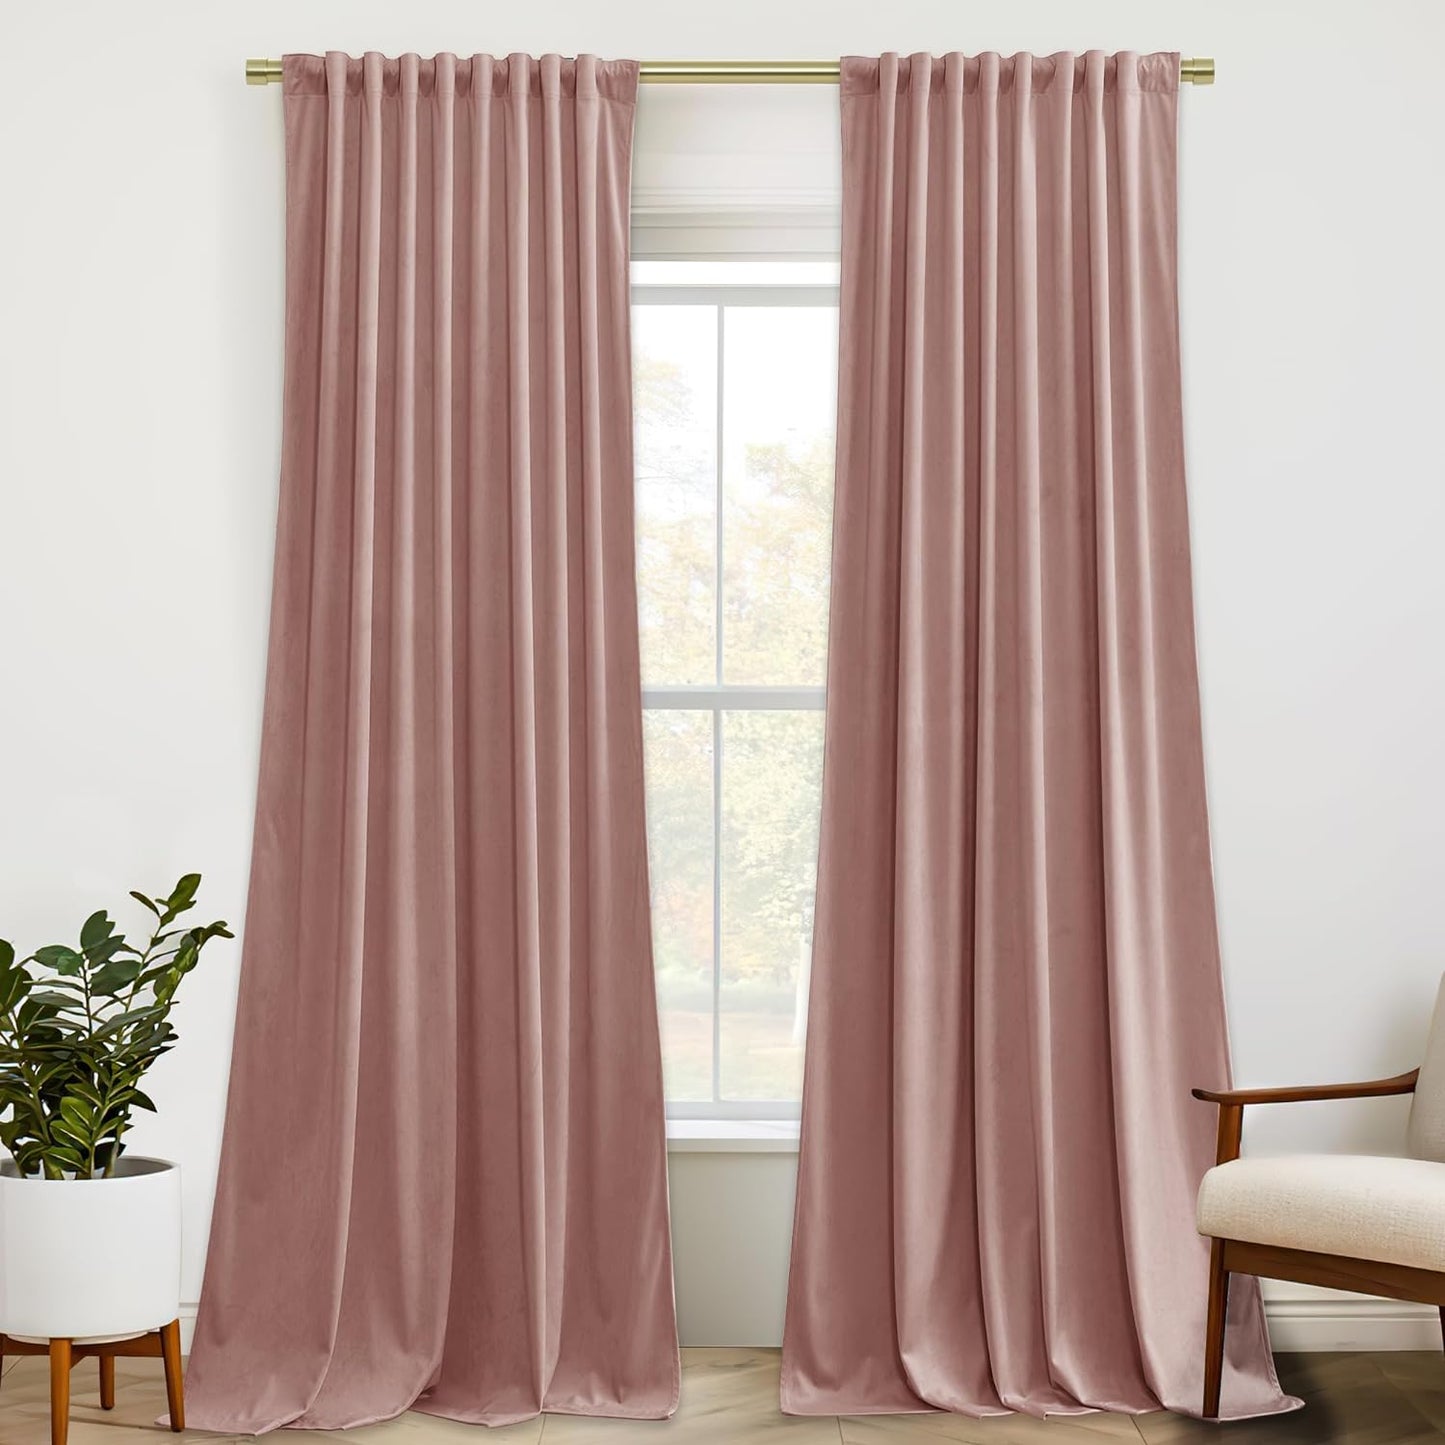 Stangh Velvet Curtains 84 Inches - Gold Brown Blackout Thermal Insulated Window Drapes for Living Room, Back Tab Luxury Home Decor Curtains for Bedroom Sliding Door, W52 X L84, 2 Panels  StangH Dusty Pink W52" X L120" 